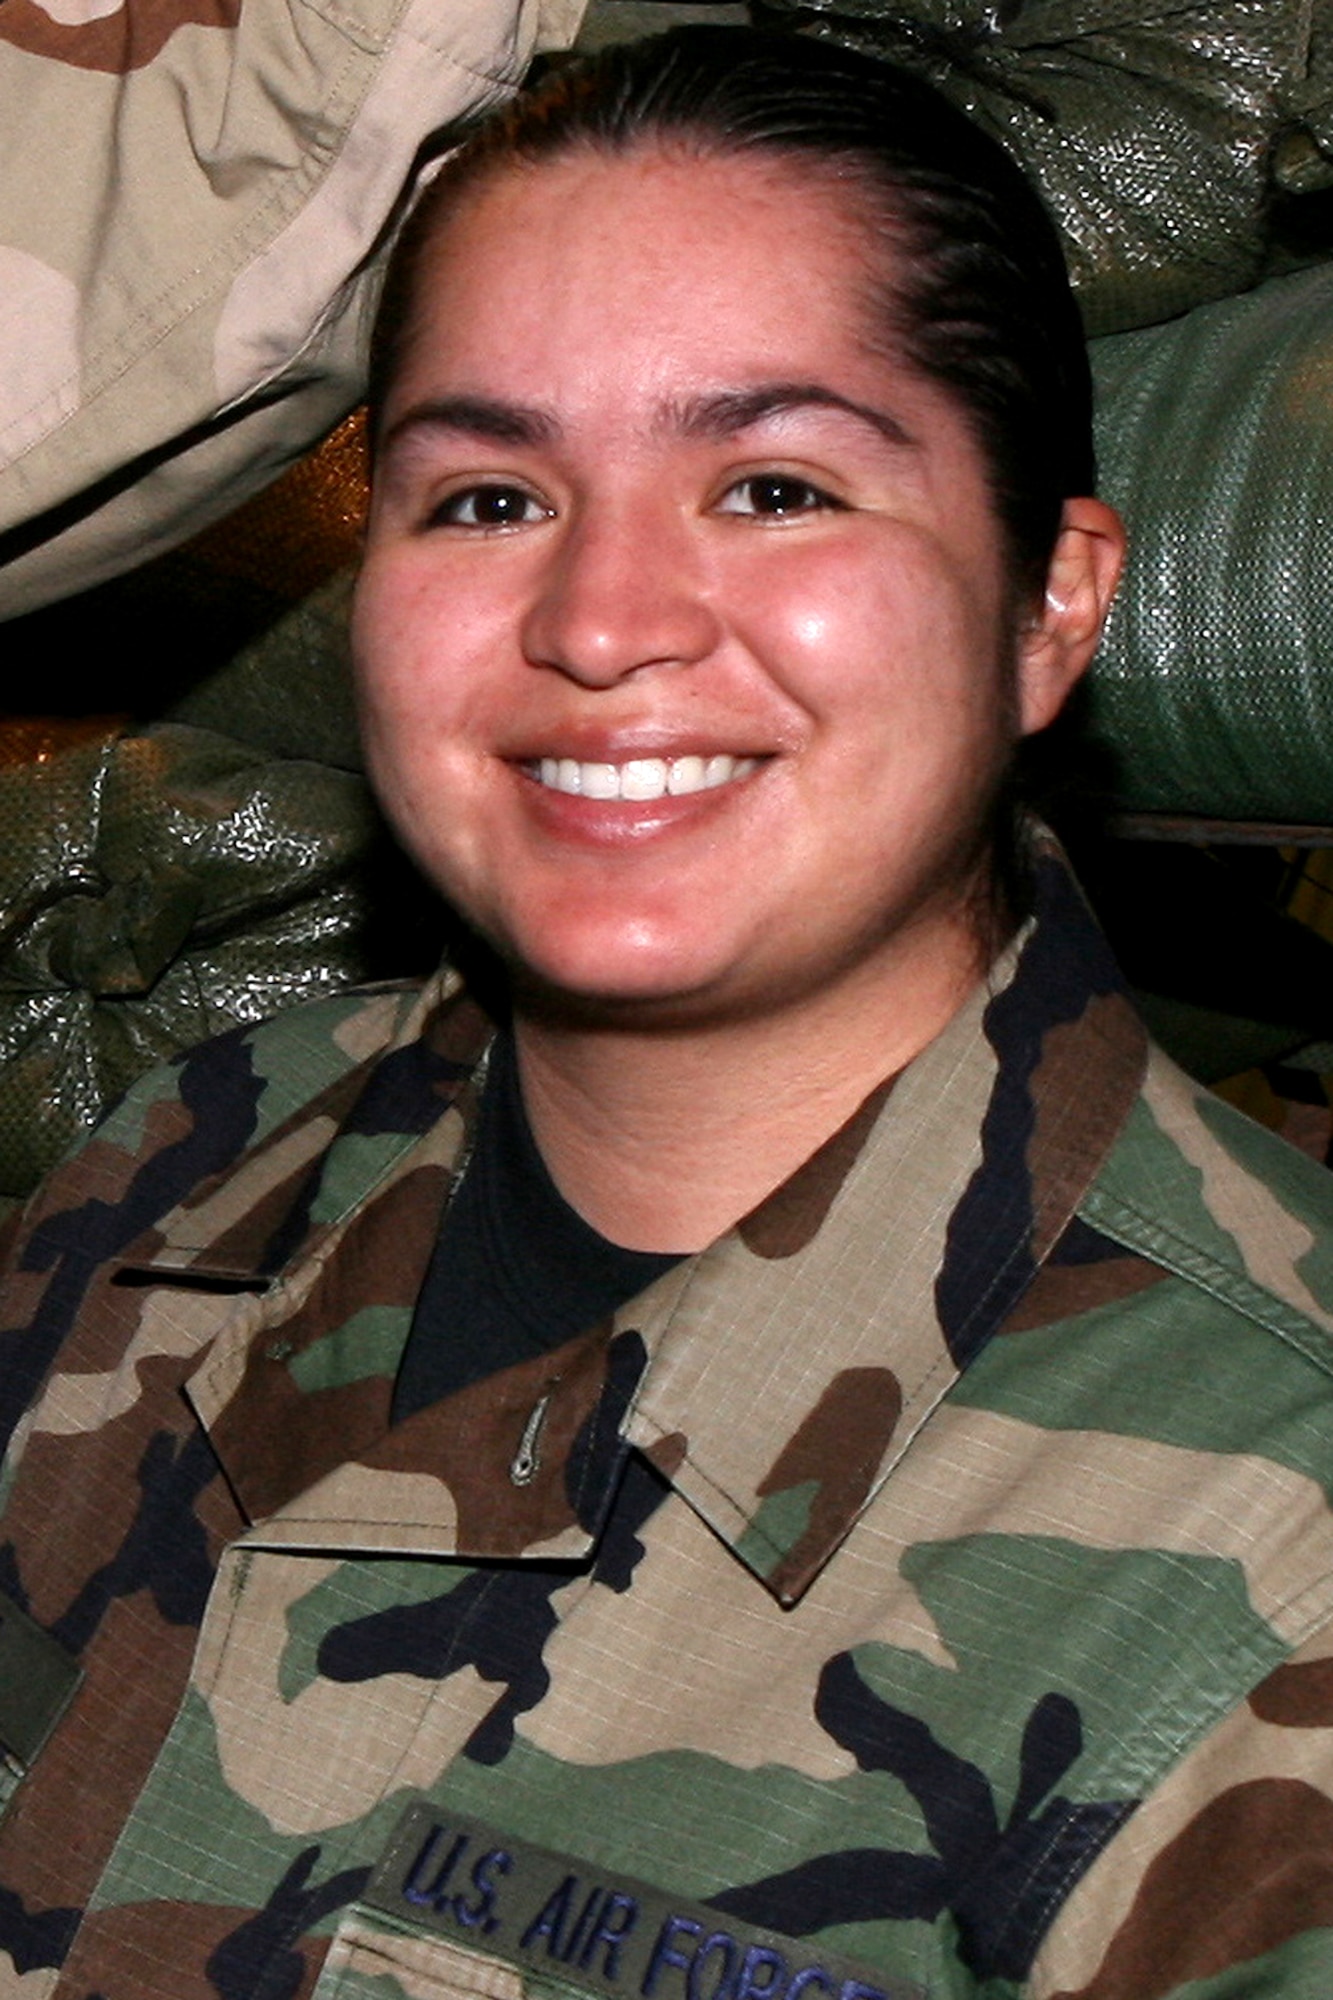 GRISSOM AIR RESERVE BASE, Ind., -- Senior Airman Blanca A. Luna, was a member of the 434th Civil Engineers Squadron. (U.S. Air Force photo)